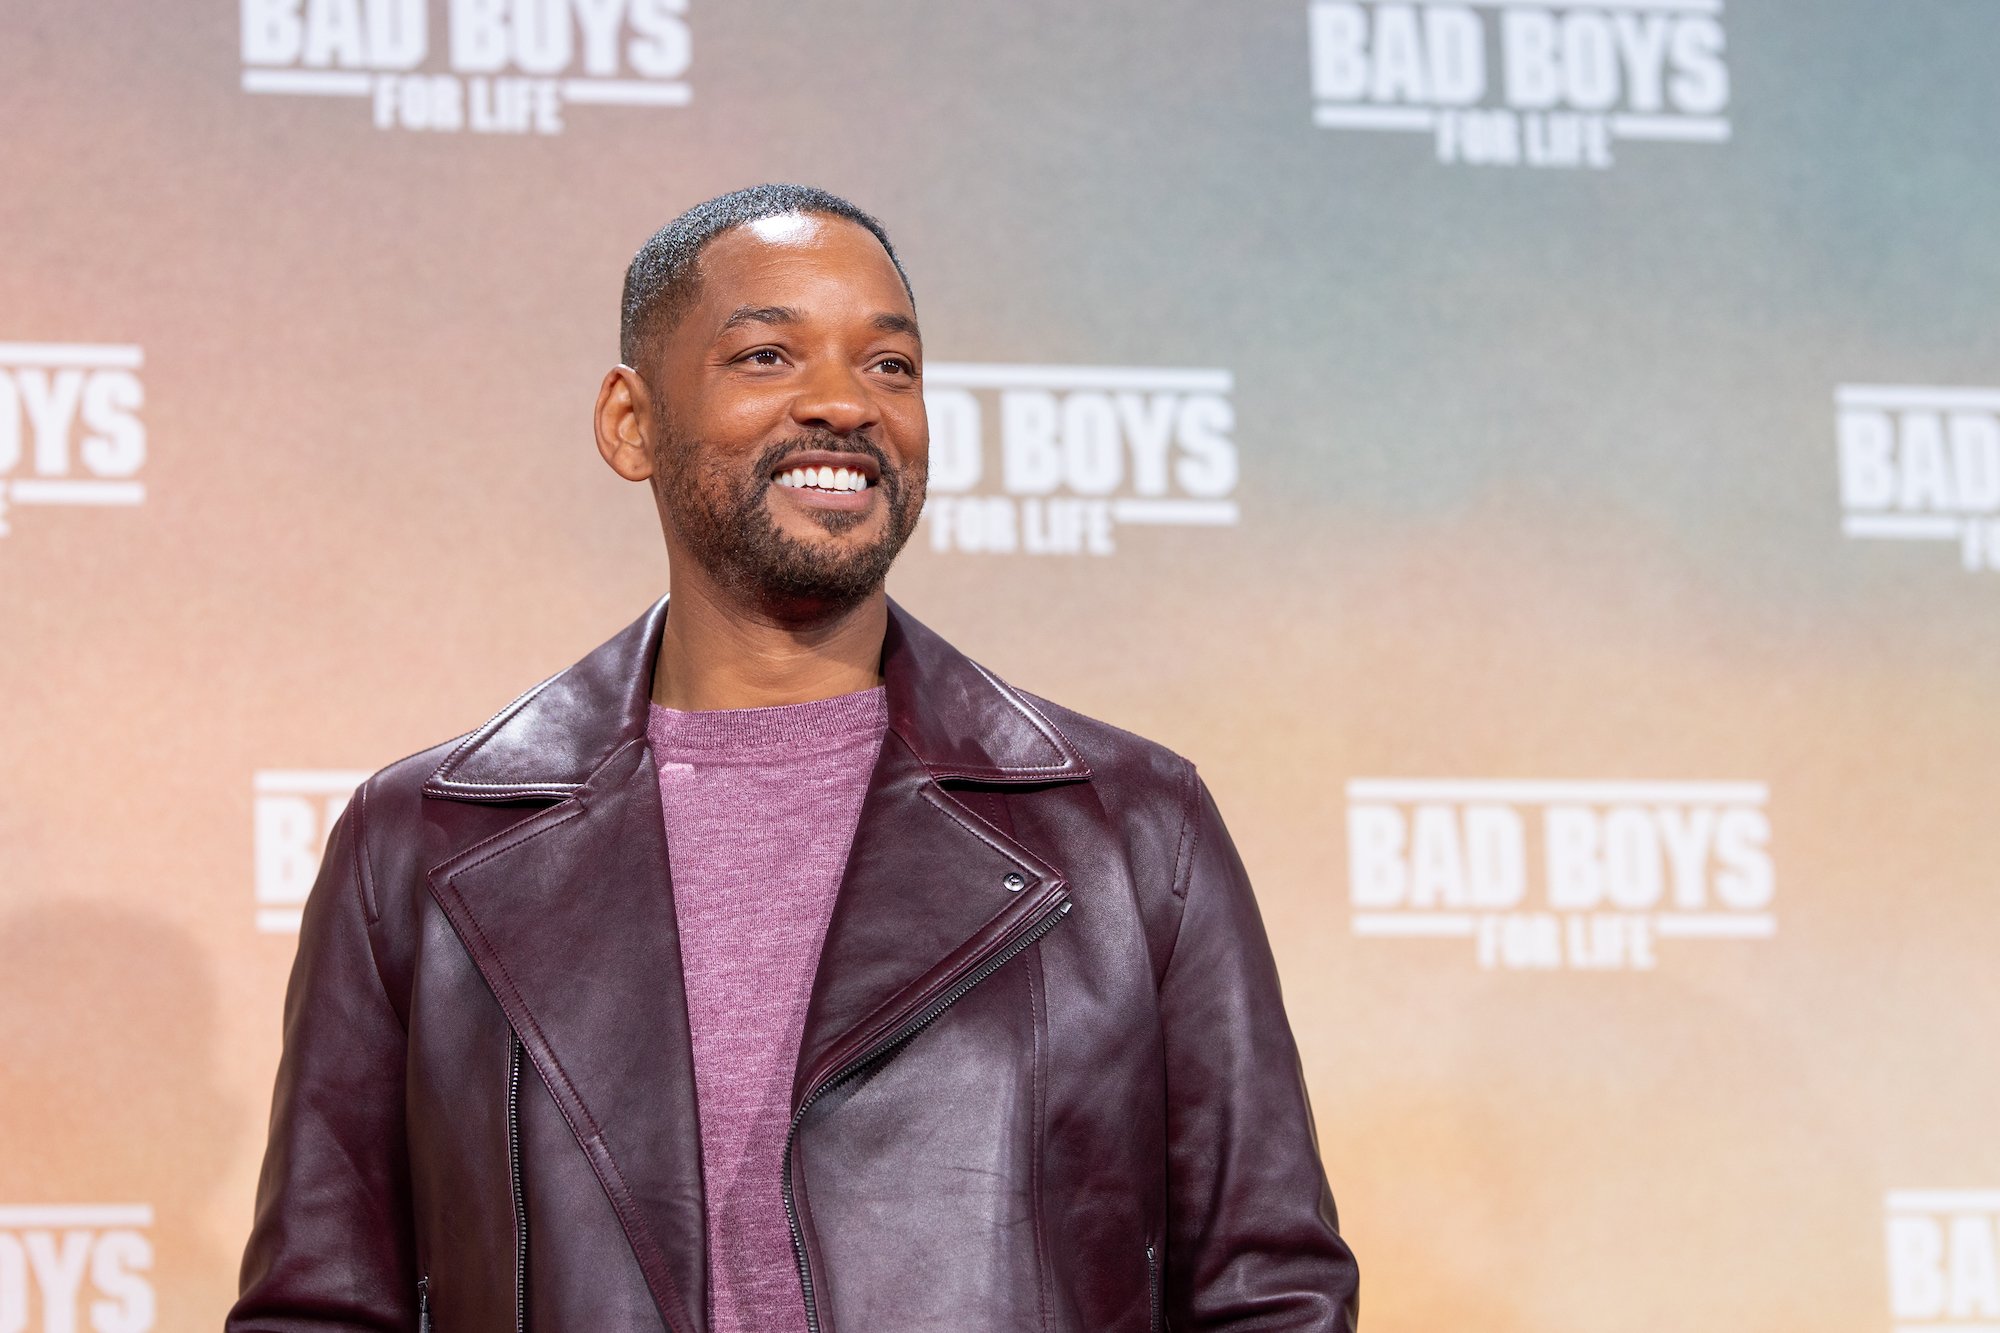 Will Smith smiling, looking away from the camera, wearing a dark red leather jacket